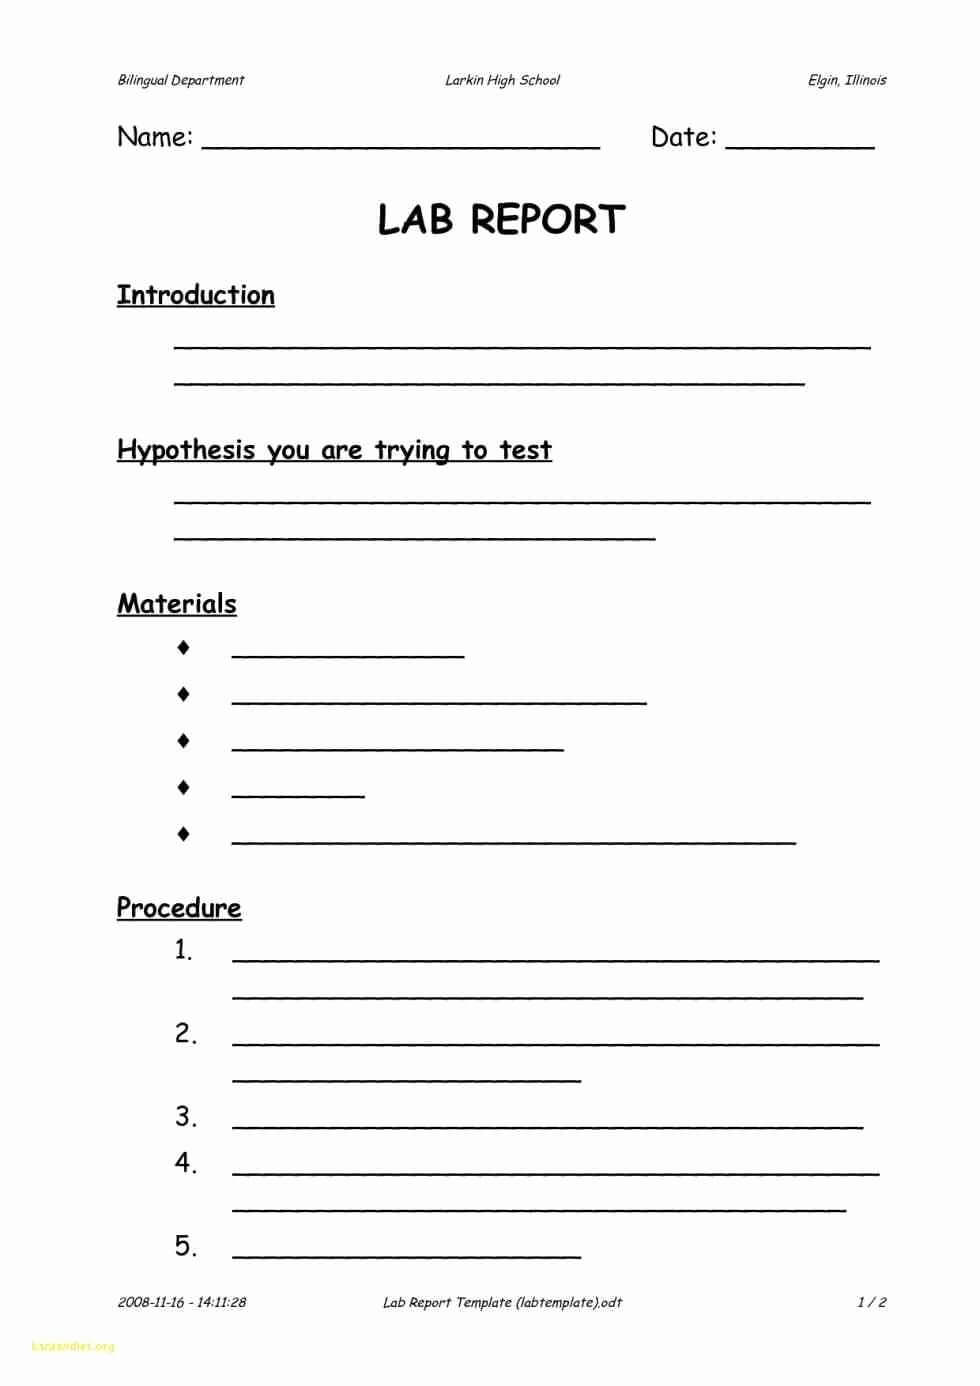 Image Result For Lab Report Template Middle School Intended For Lab Report Template Middle School